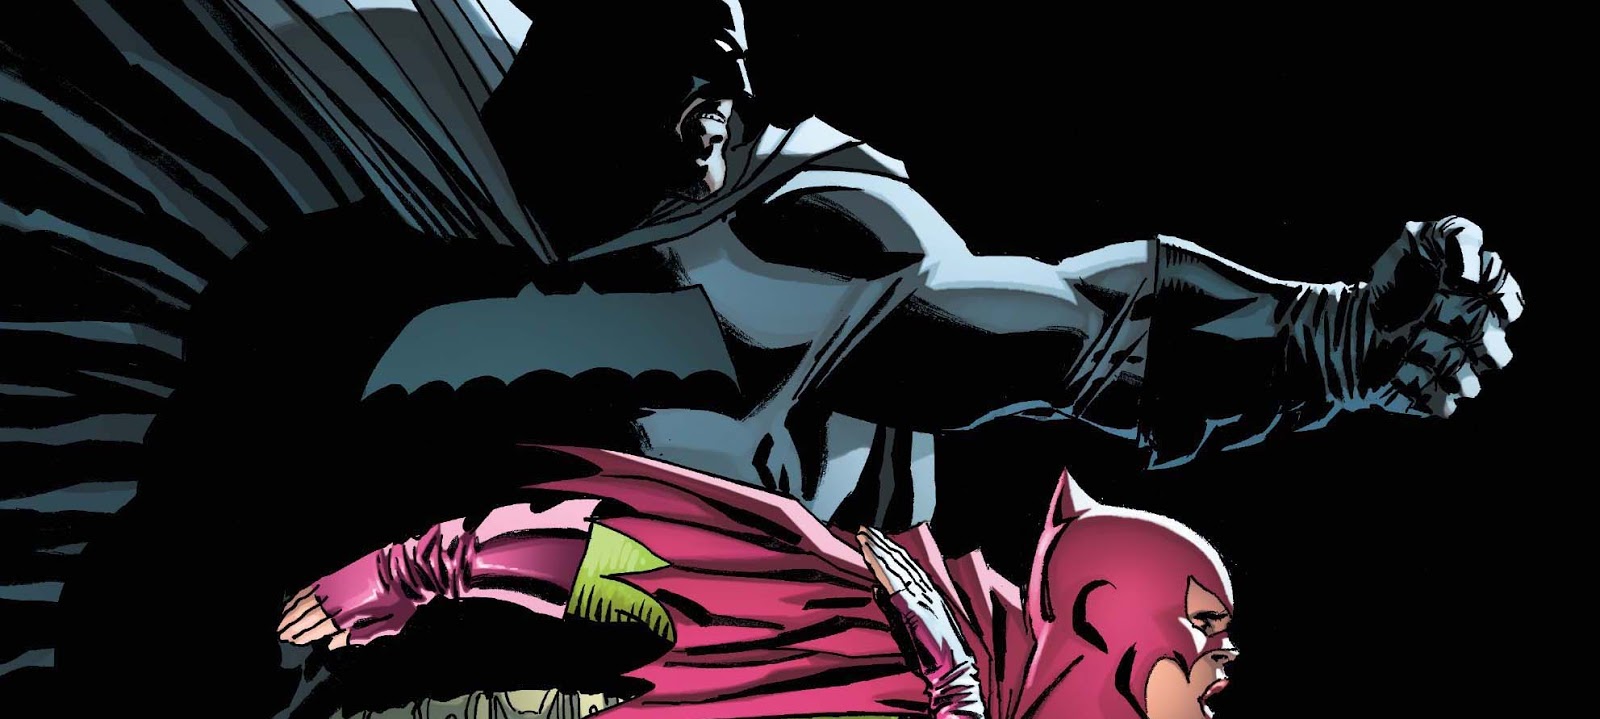 Weird Science DC Comics: Dark Knight III: The Master Race #6 Review and  **SPOILERS**